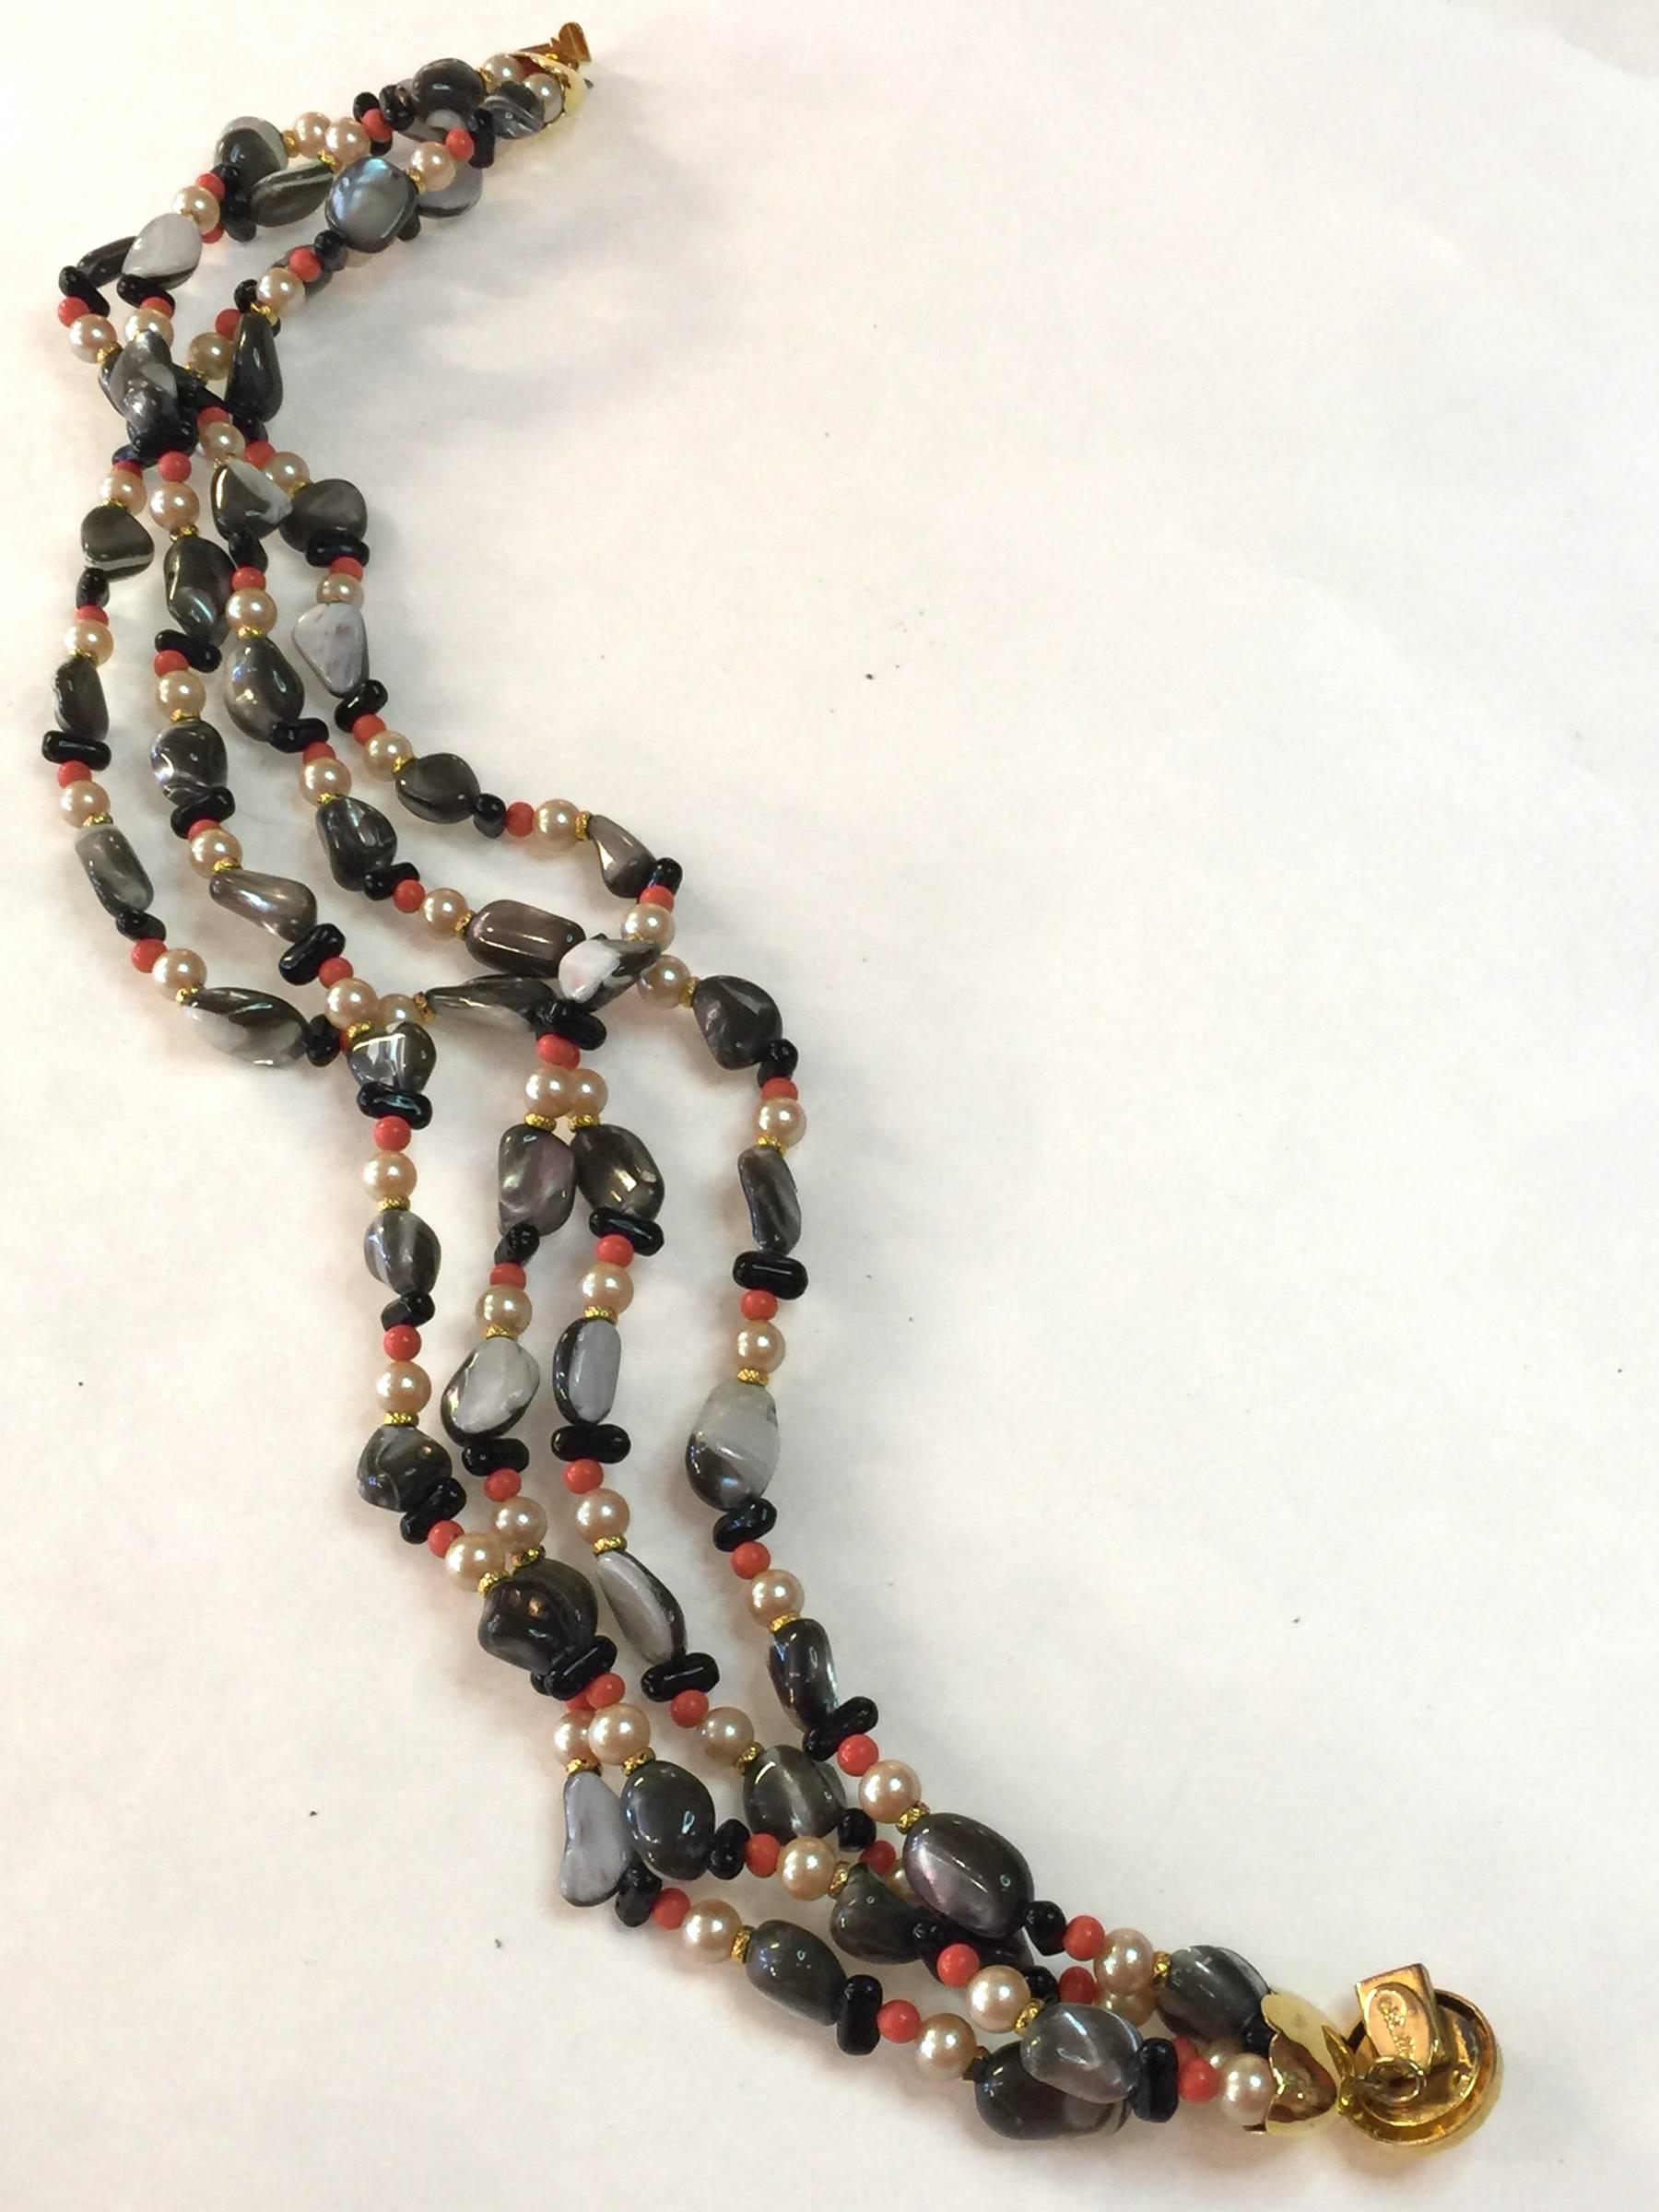 Simple and classic, yet exotic in tone, this multi strand necklace by storied designer William DeLillo is wonderful and wearable! Four strands of a cavalcade of undersea faux gems tumble and twist around the wearer's neck with style and elegance.